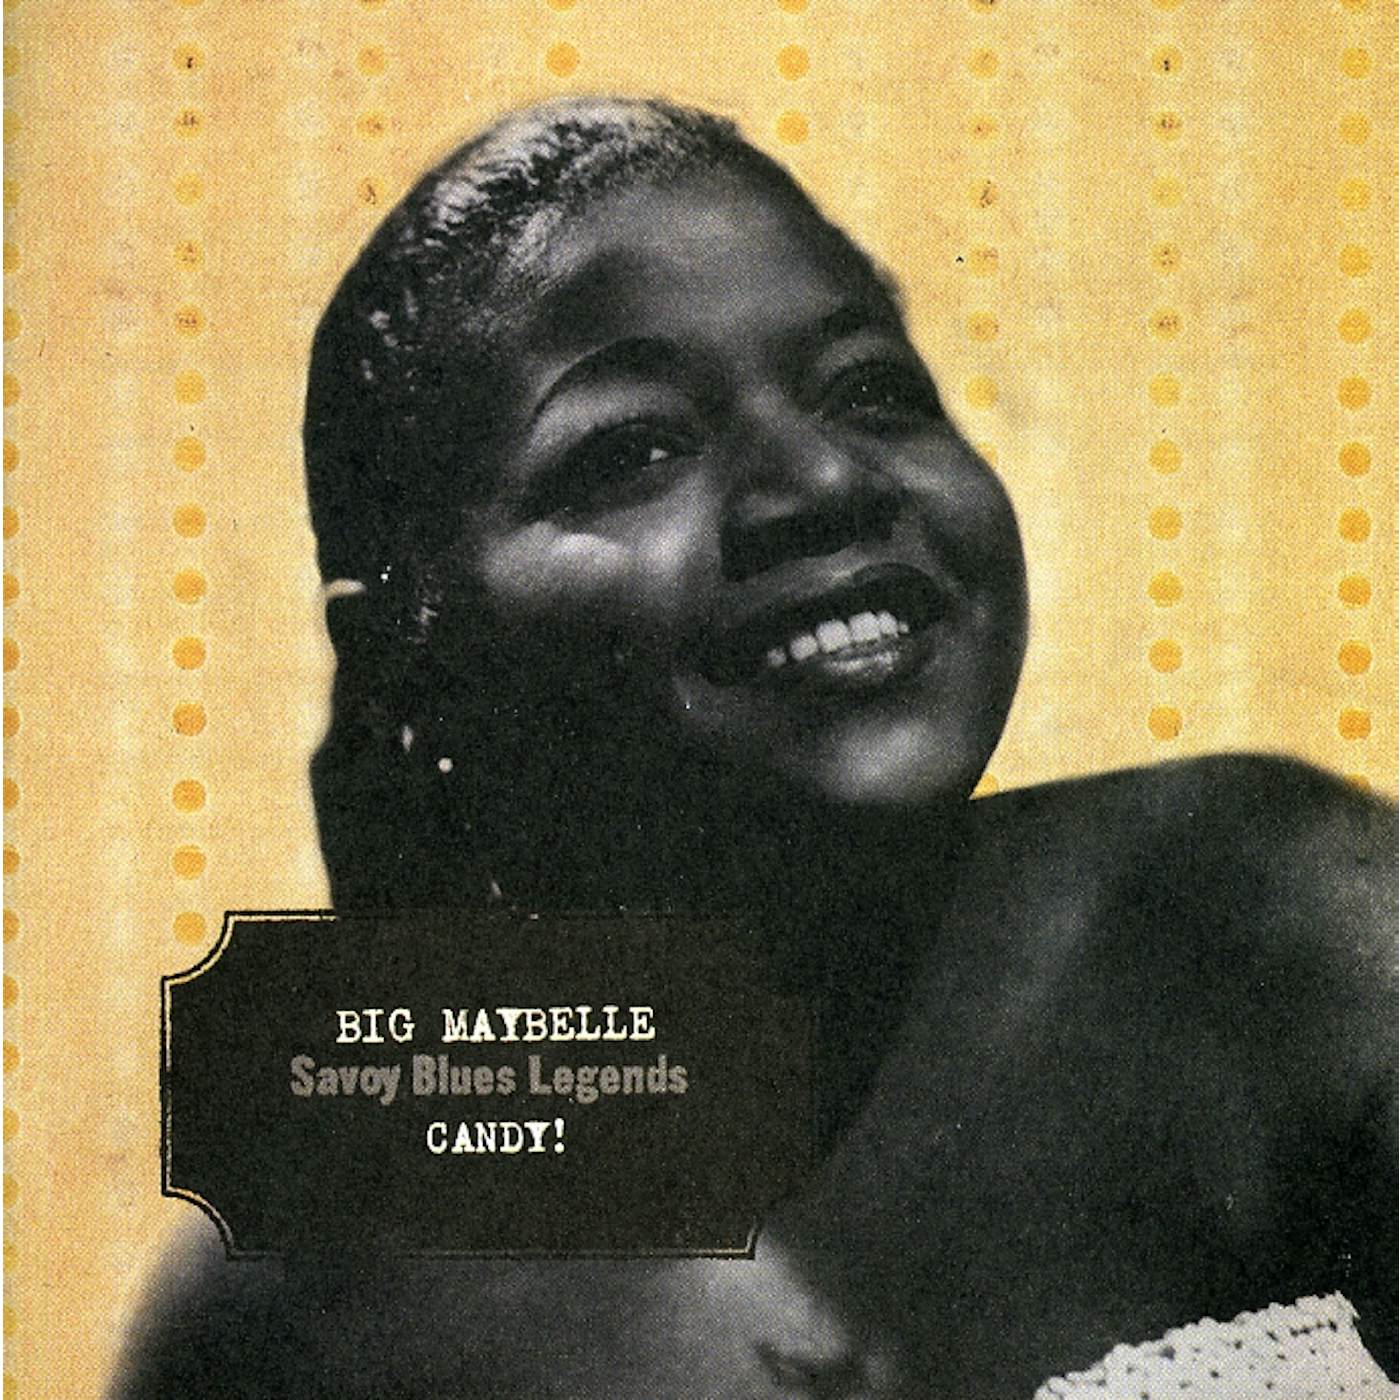 Big Maybelle CANDY: ON SAVOY 1956-59 CD